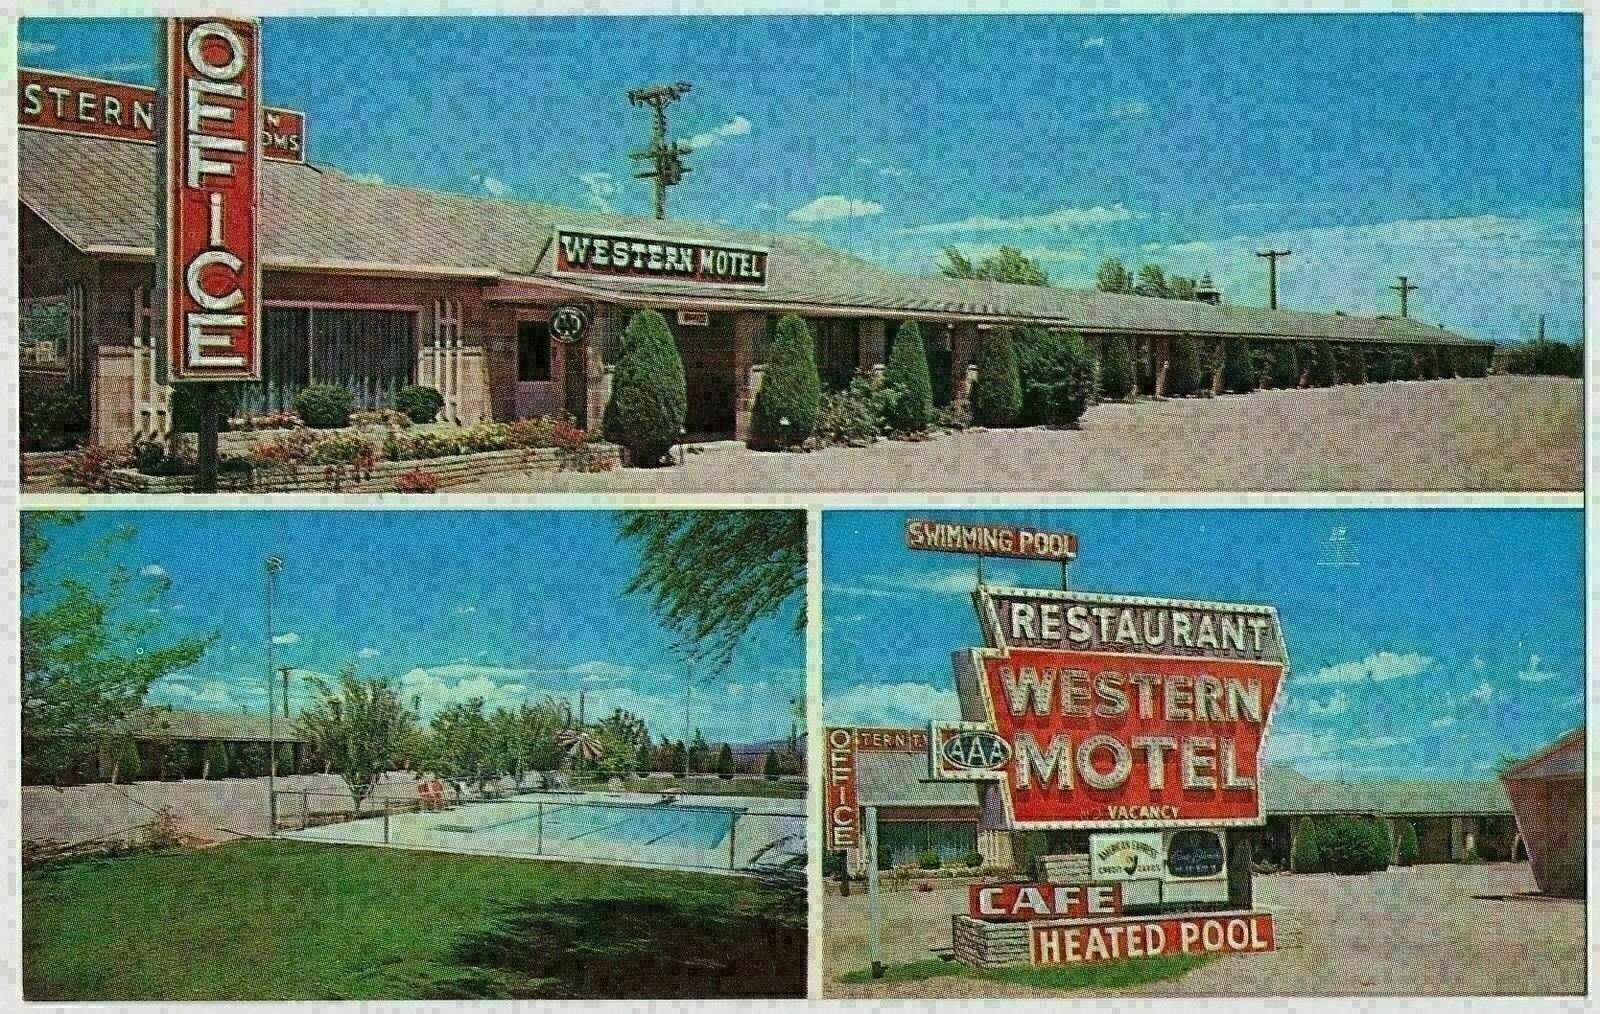 Western Motel, Highway 70-80, Deming, New Mexico